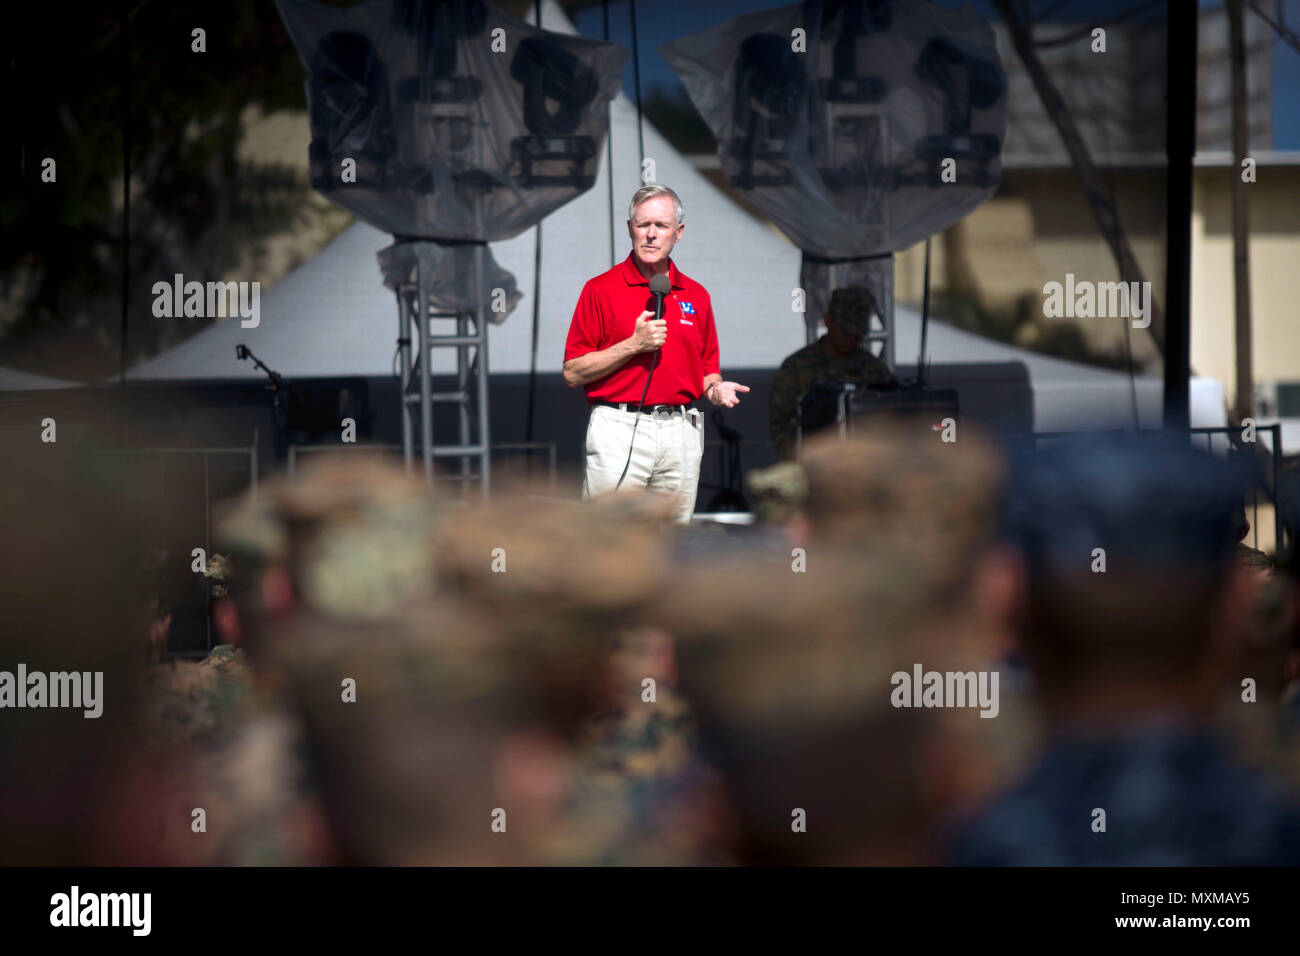 Secretary of the Navy Ray Mabus, addresses the Marines and Sailors of Marine Corps Base Hawaii (MCBH) during a question and answer session at Dewey Square, Nov. 16, 2016. Mabus was visiting Hawaii to speak to the Marines and Sailors of Joint Base Pearl Harbor-Hickam and Marine Corps Base Hawaii. (U.S. Marine Corps Photo by Cpl. Aaron S. Patterson)161116-M-QH615-049 Join the conversation: http://www.navy.mil/viewGallery.asp http://www.facebook.com/USNavy http://www.twitter.com/USNavy http://navylive.dodlive.mil http://pinterest.com https://plus.google.com Stock Photo